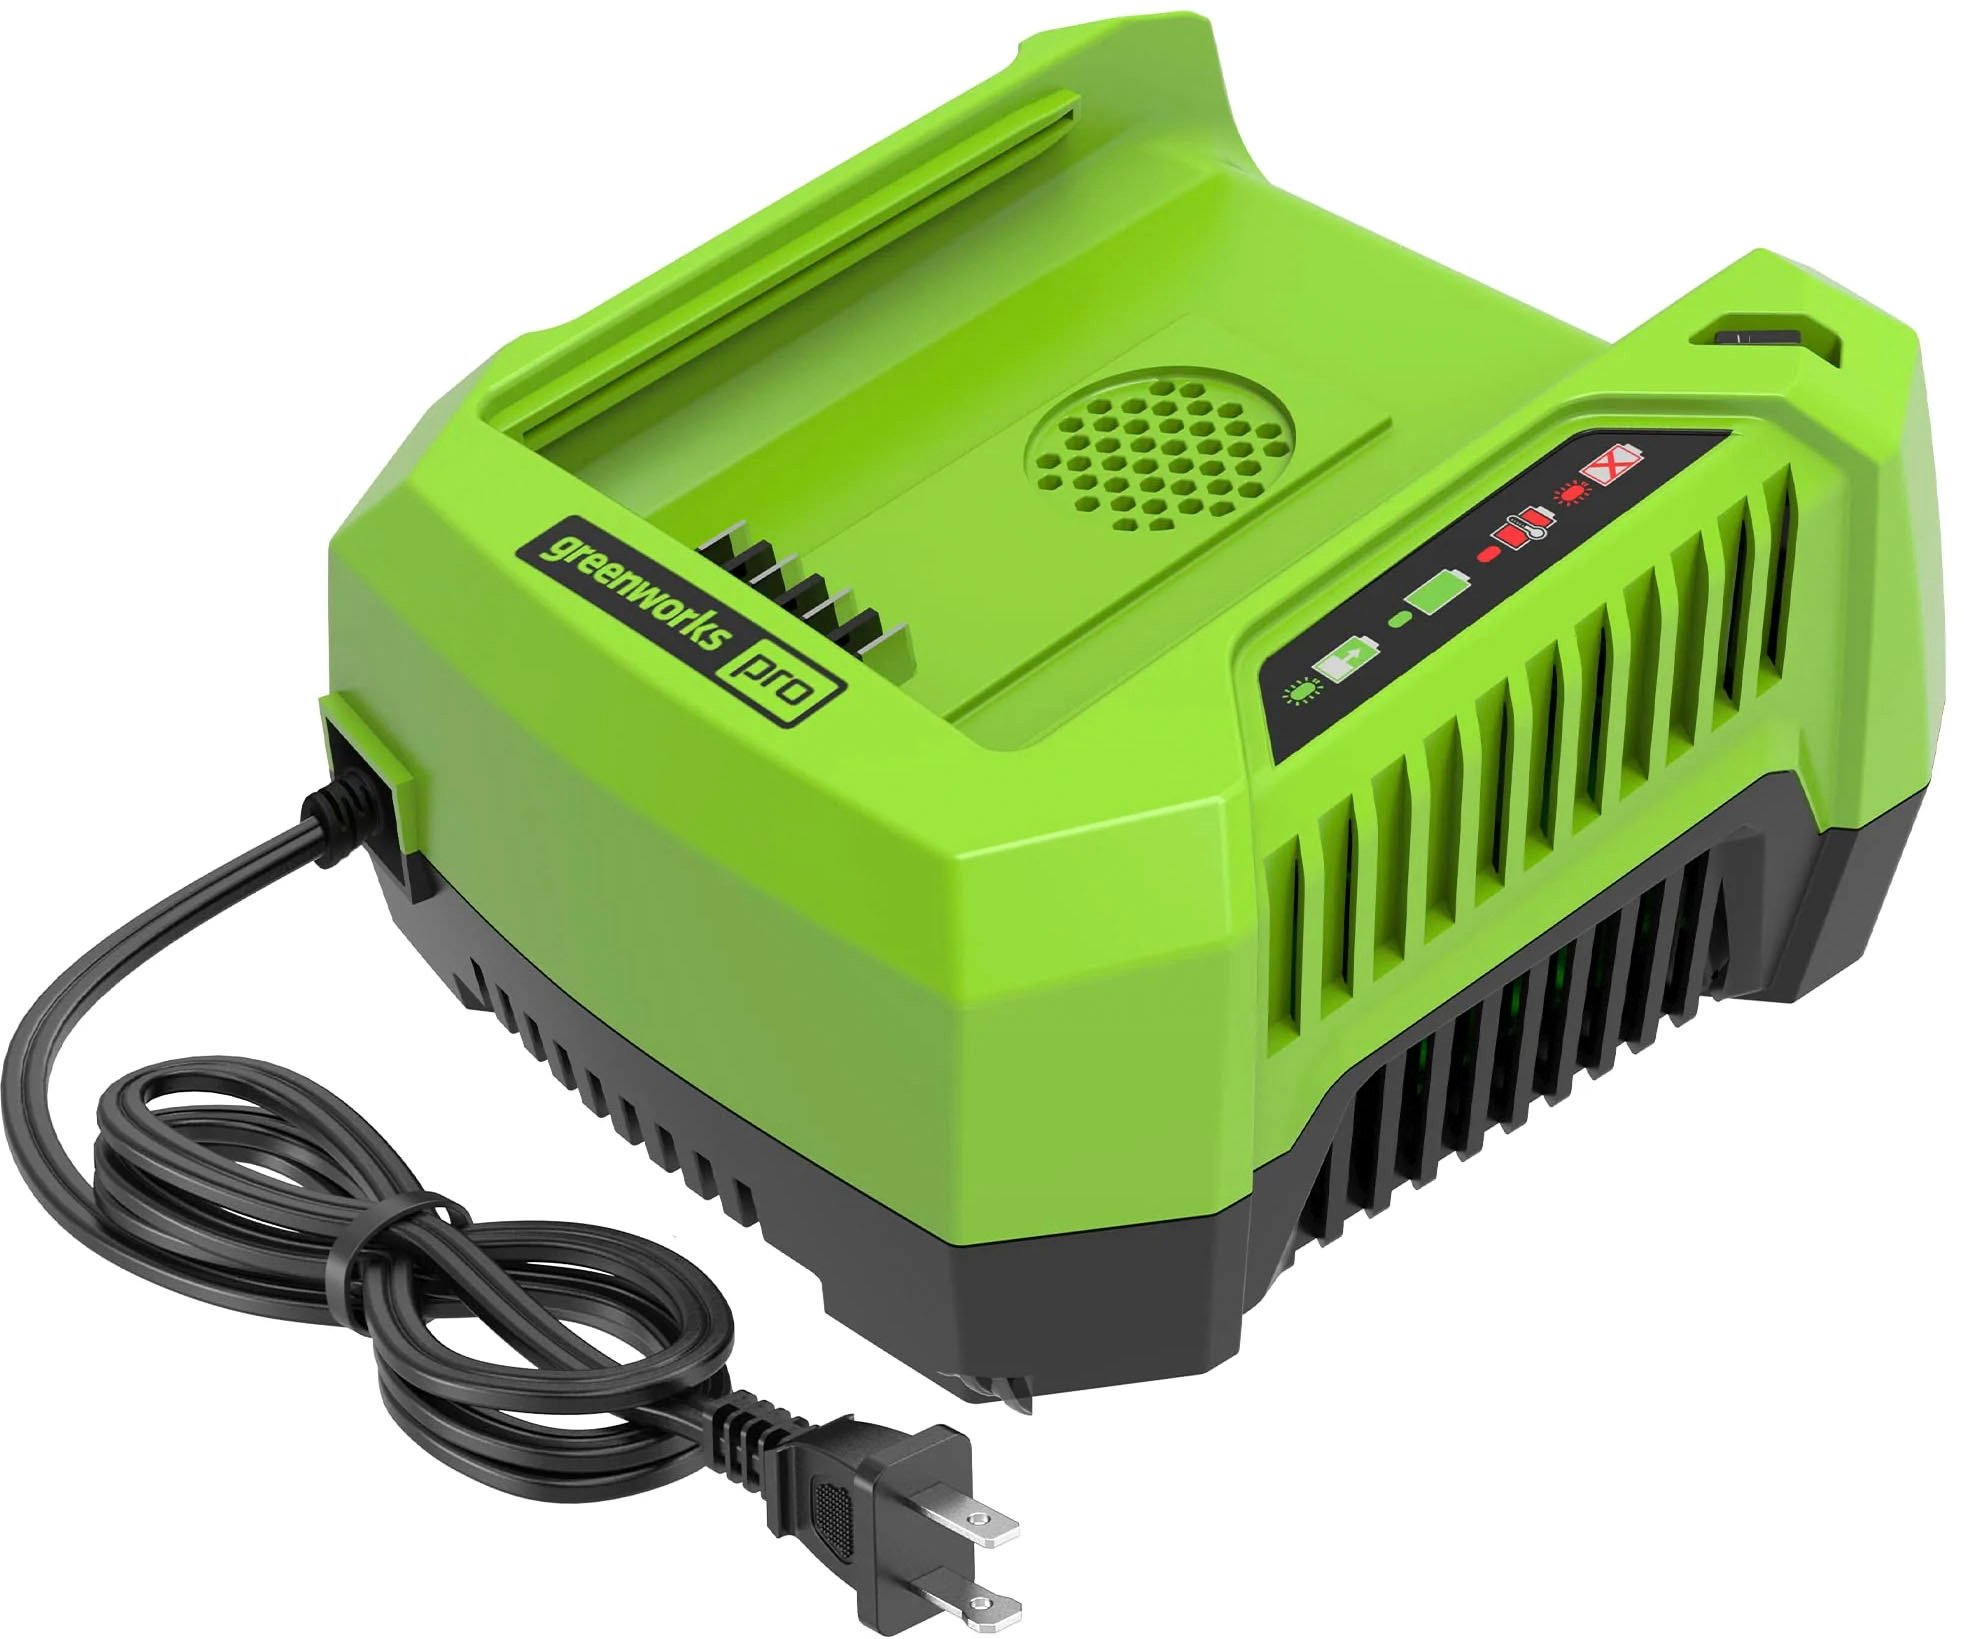 40V Max* Battery Fast Charger